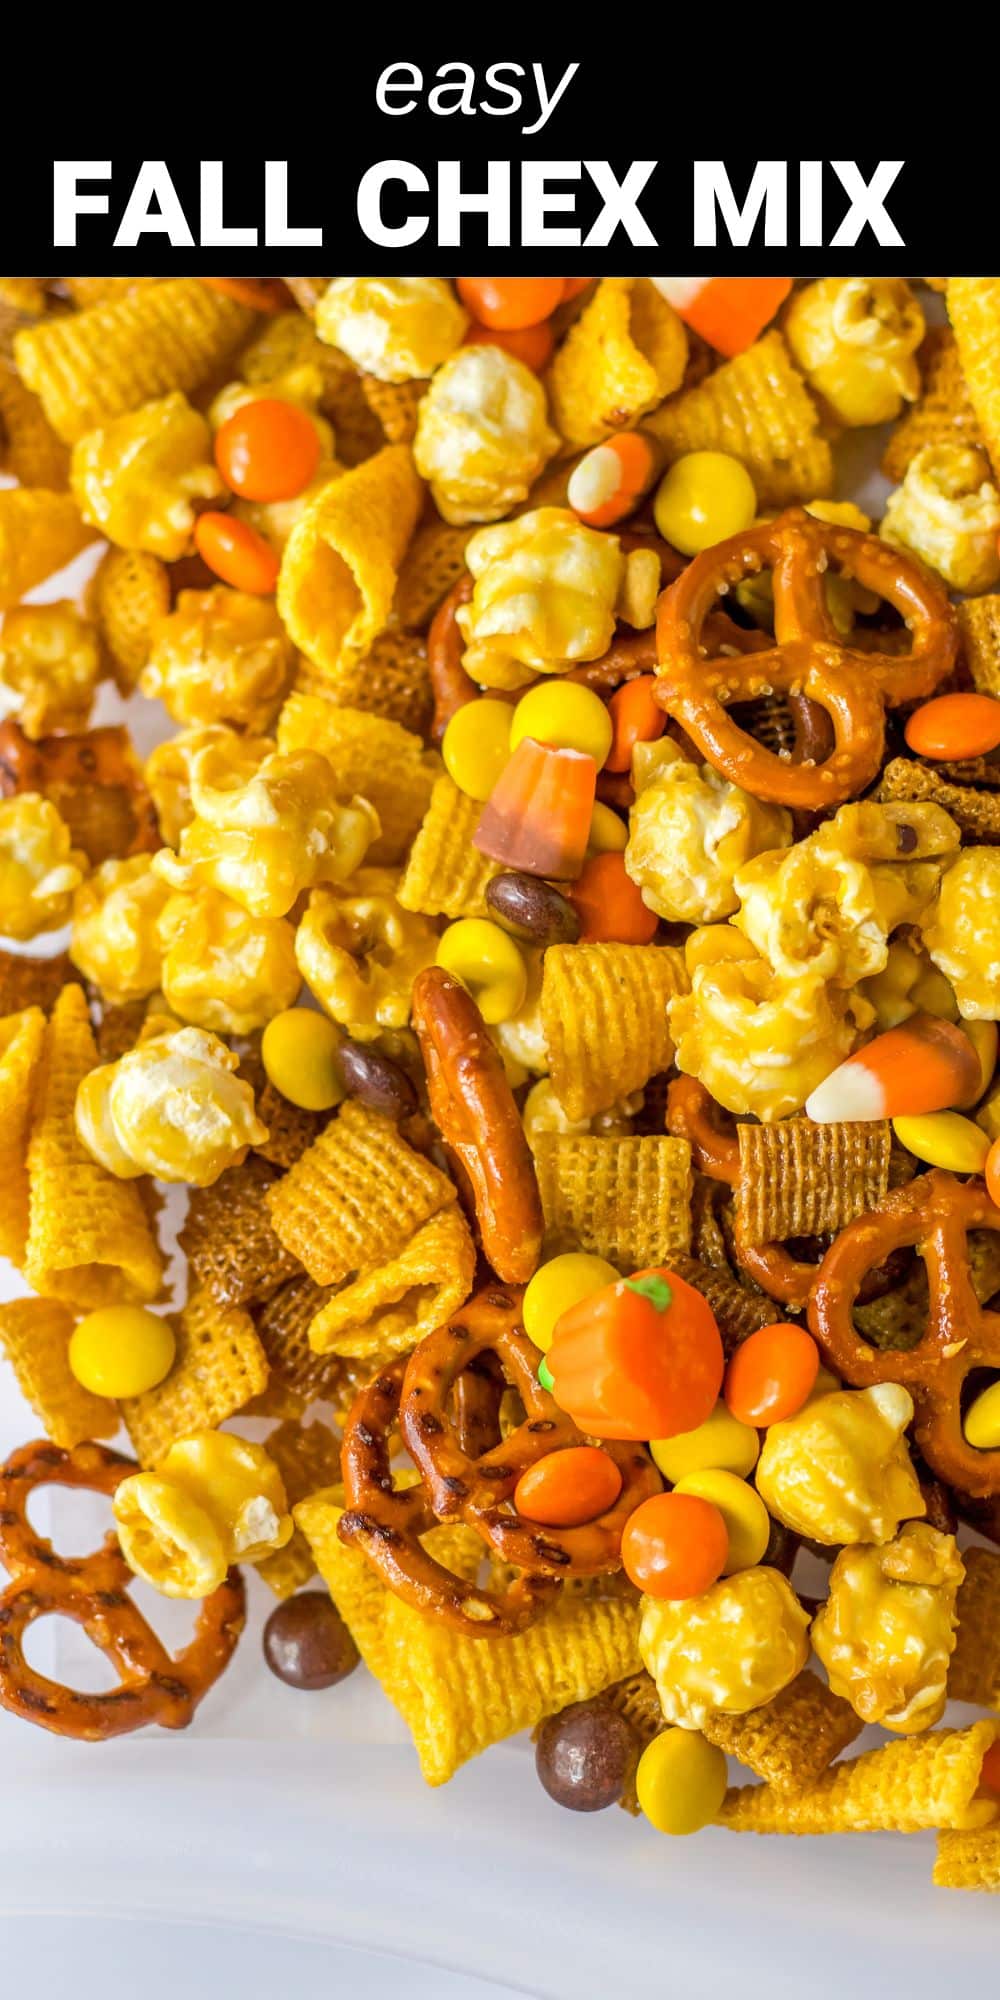 This quick and easy Fall Chex Mix is a delicious, sweet treat made with the perfect combination of wheat and rice Chex, salty pretzels, and everyone's favorite Halloween candies. It's the perfect snack for all your fall season gatherings.